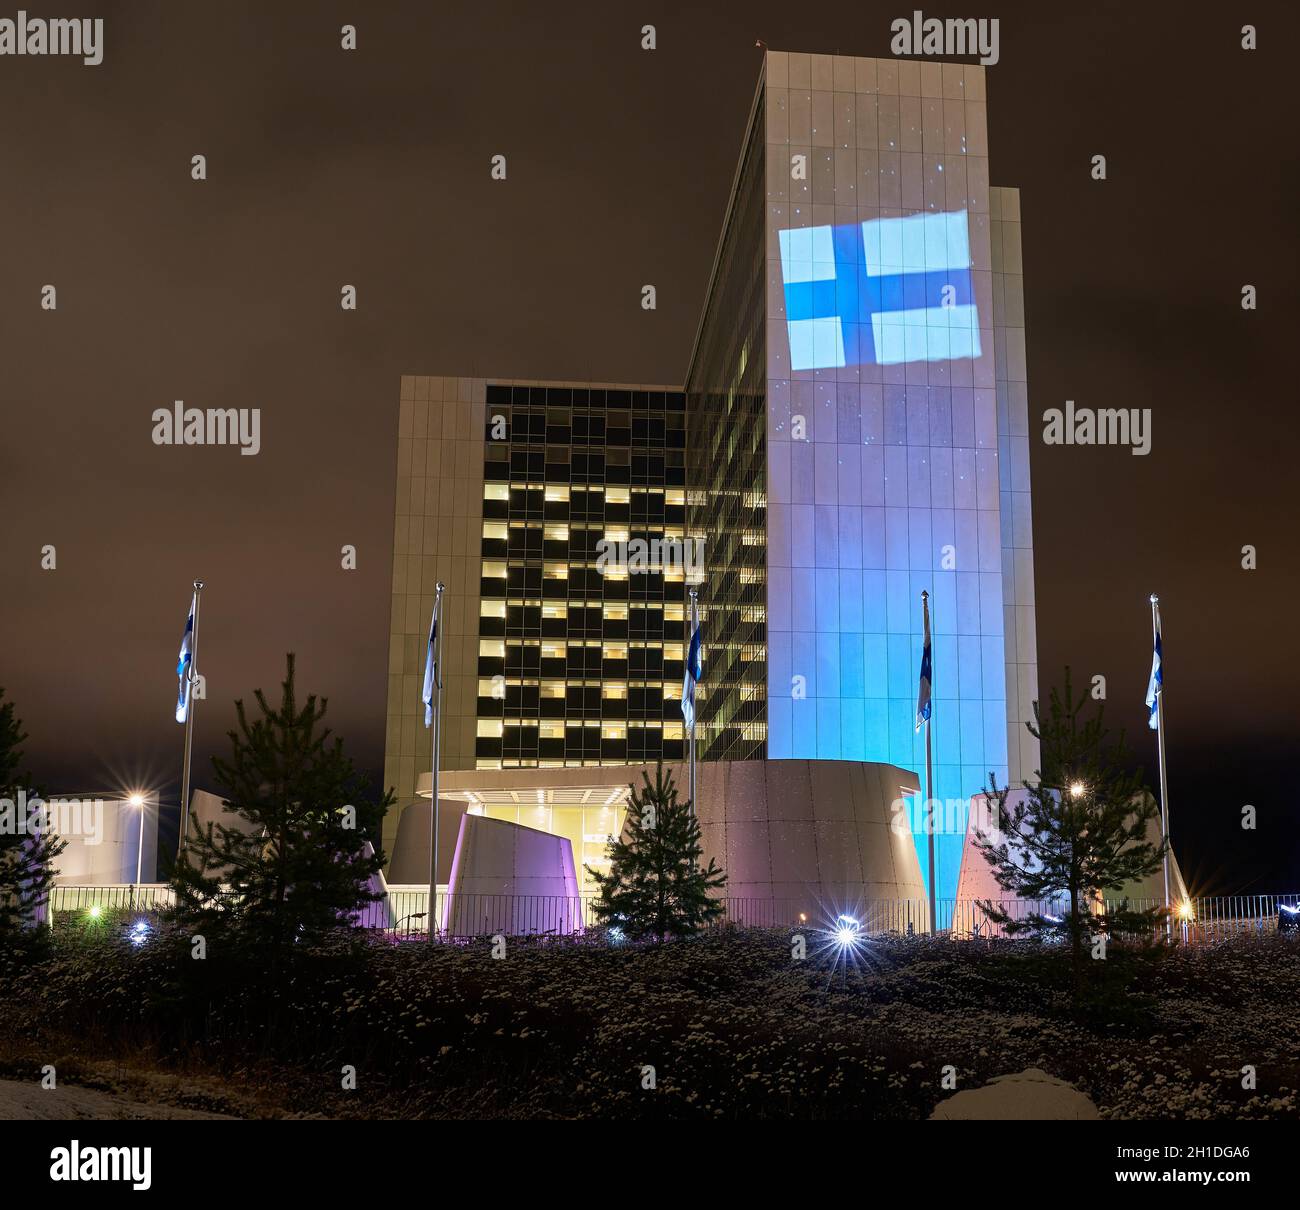 Helsinki, Finland - December 6, 2017: The Helsinki University Hospital in Meilahti decorated with blue and white colour lights and Finnish flag as par Stock Photo